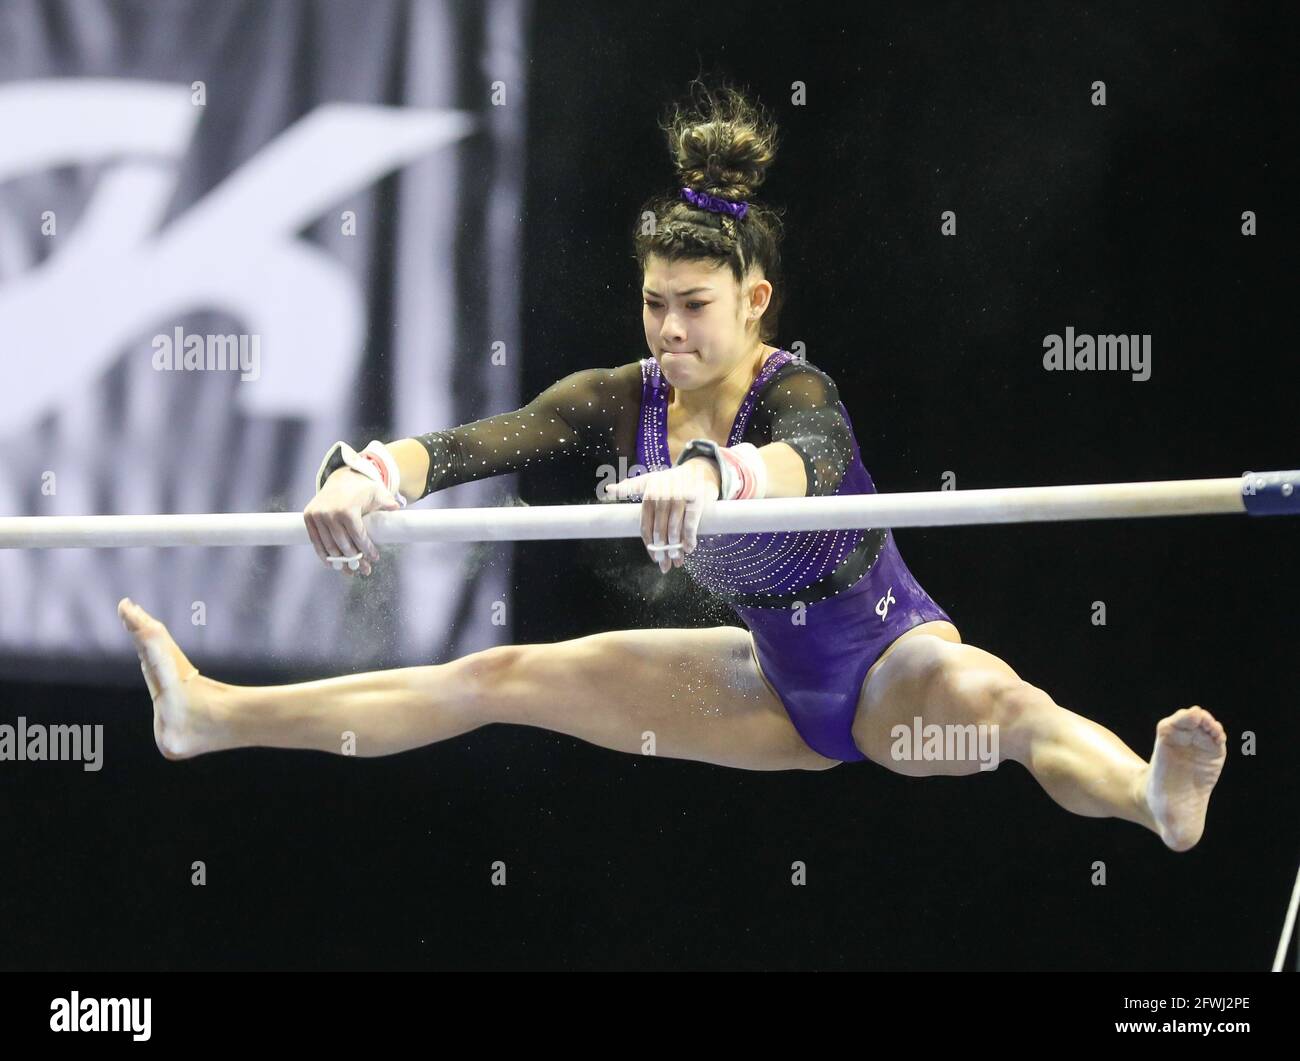 Indianapolis, USA. May 22, 2021: Kayla DiCello performs on the uneven bars during the 2021 GK U.S. Classic at the Indiana Convention Center in Indianapolis, IN. Kyle Okita/CSM Credit: Cal Sport Media/Alamy Live News Stock Photo